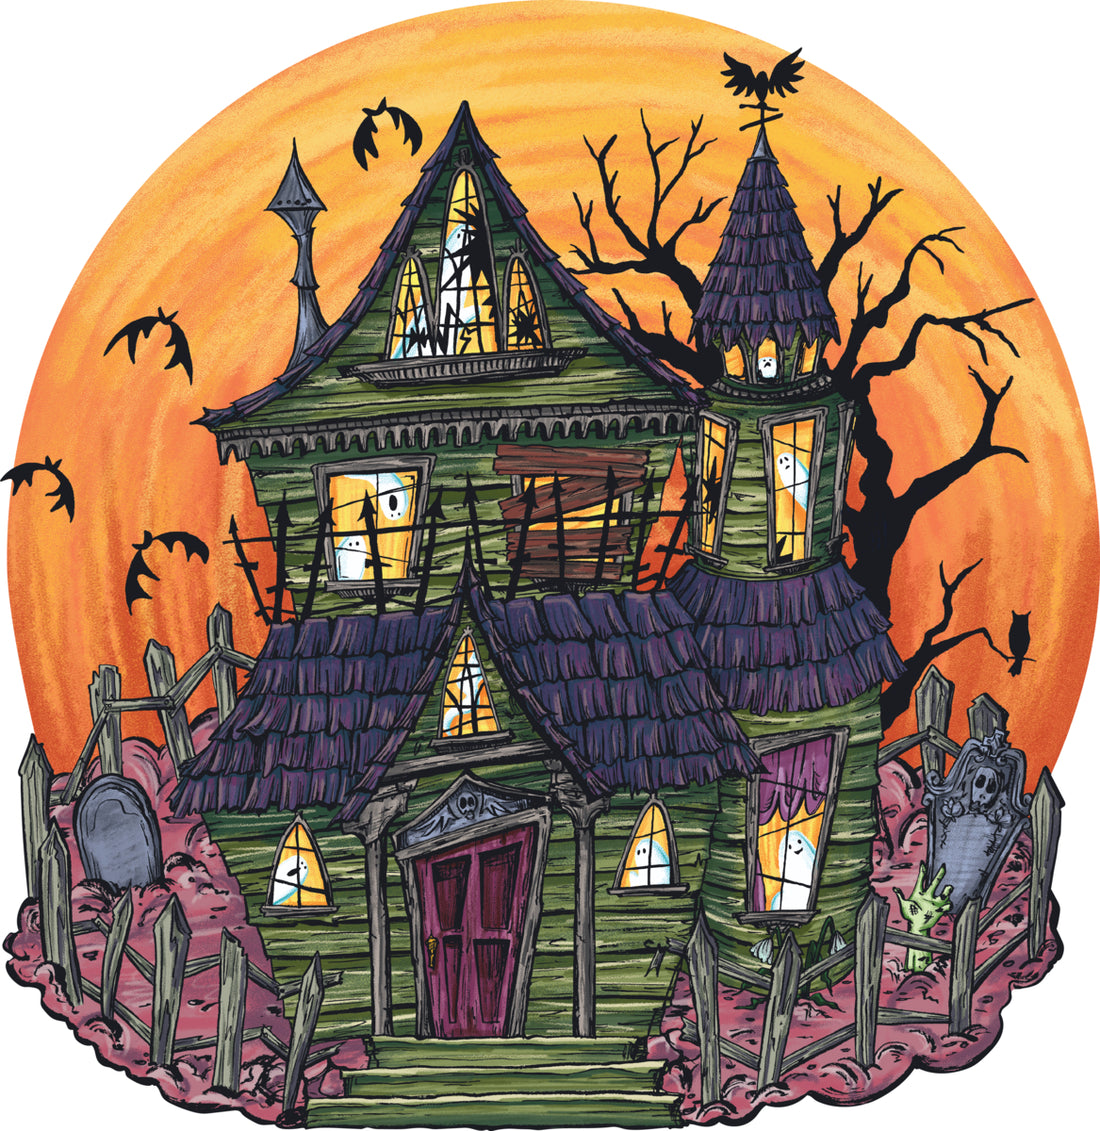 A zany, spooky illustration of a dilapidated, green haunted house surrounded by a graveyard, with a big yellow-orange full moon in the background spotted with flying bats.